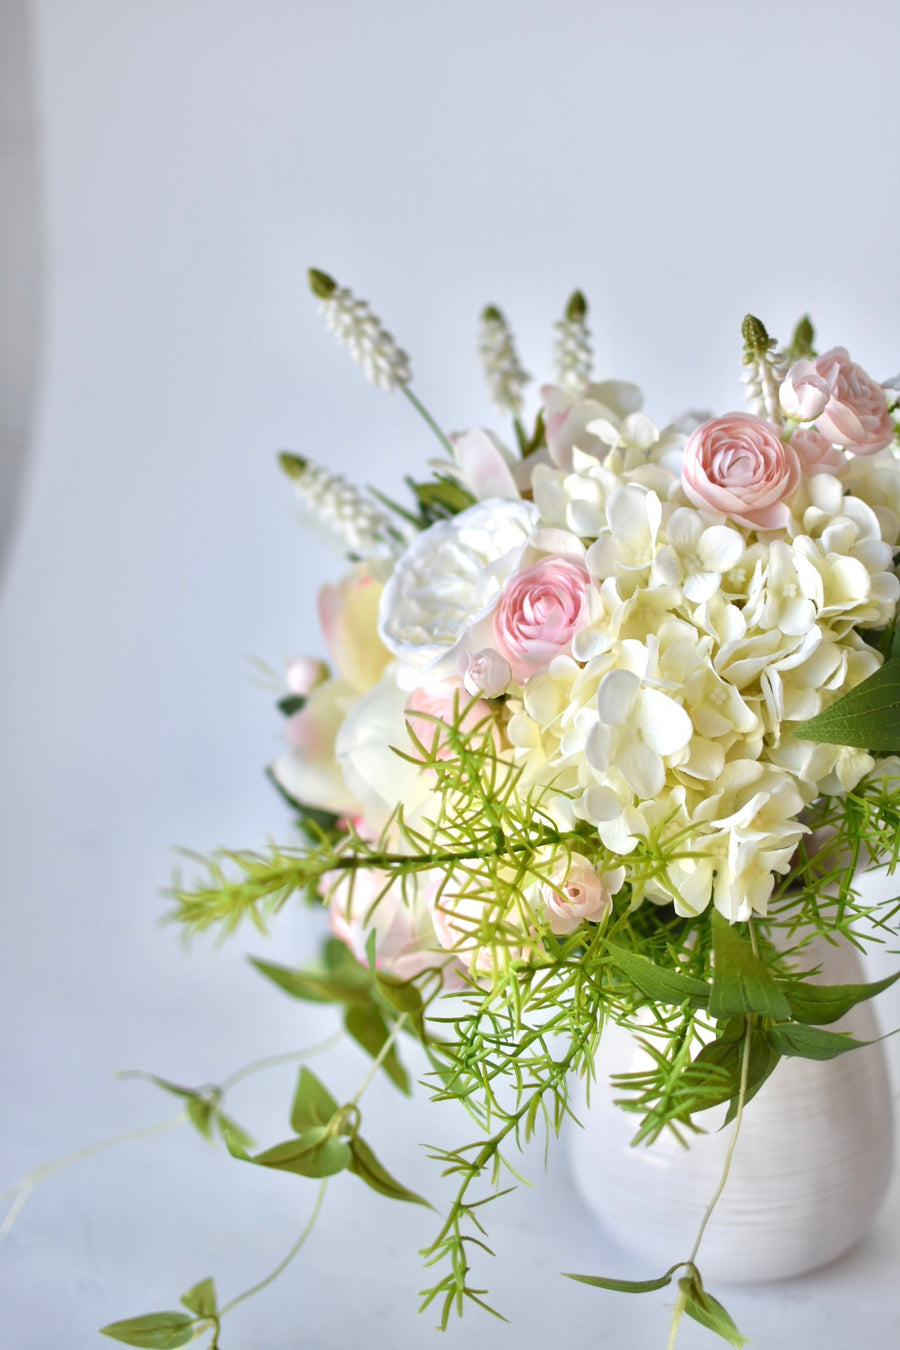 Tips for Realistic Faux Wedding Flowers